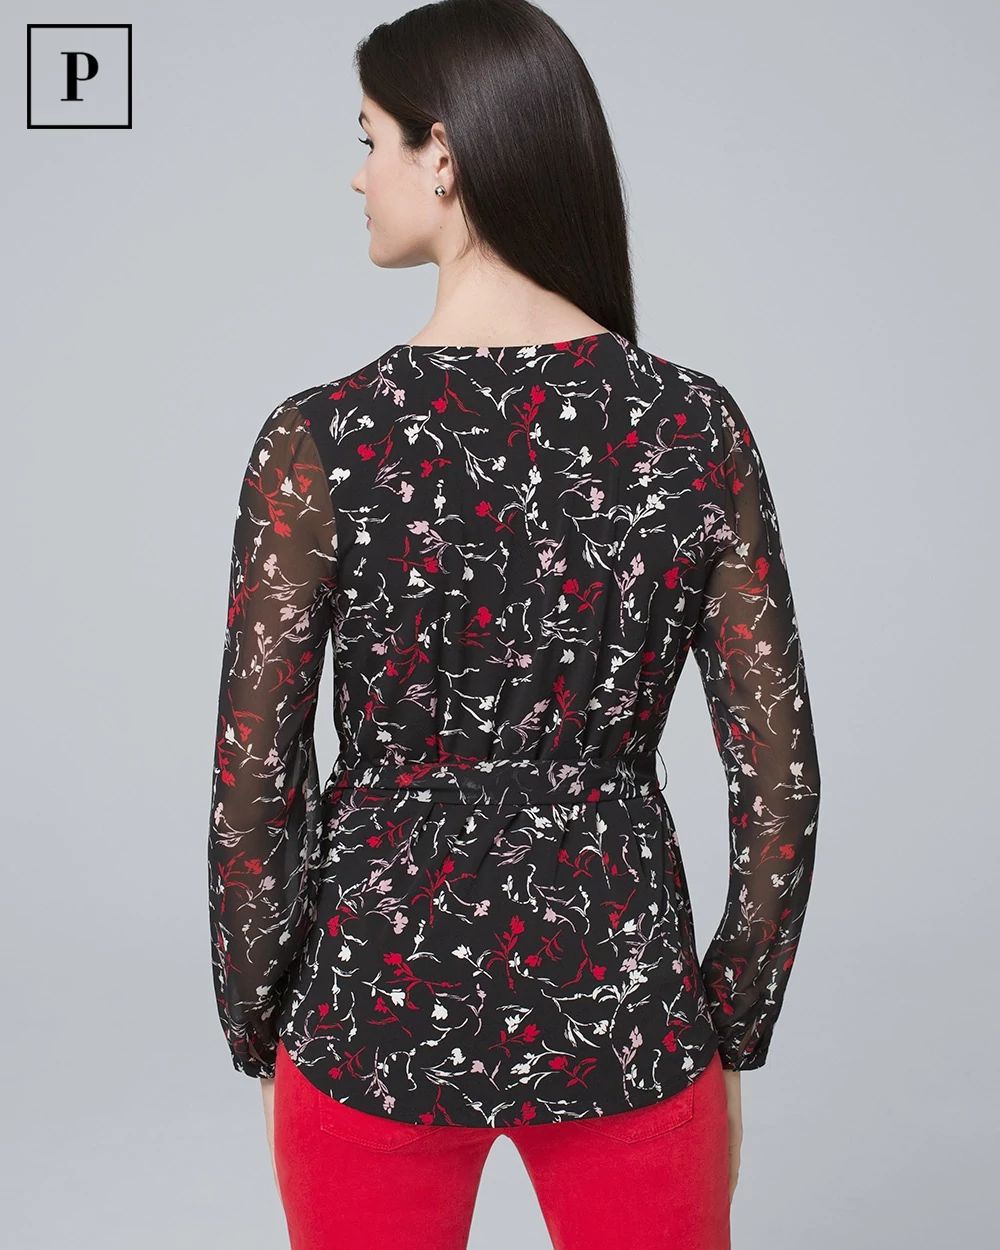 Petite Woven-Sleeve Tie-Waist Floral Top click to view larger image.